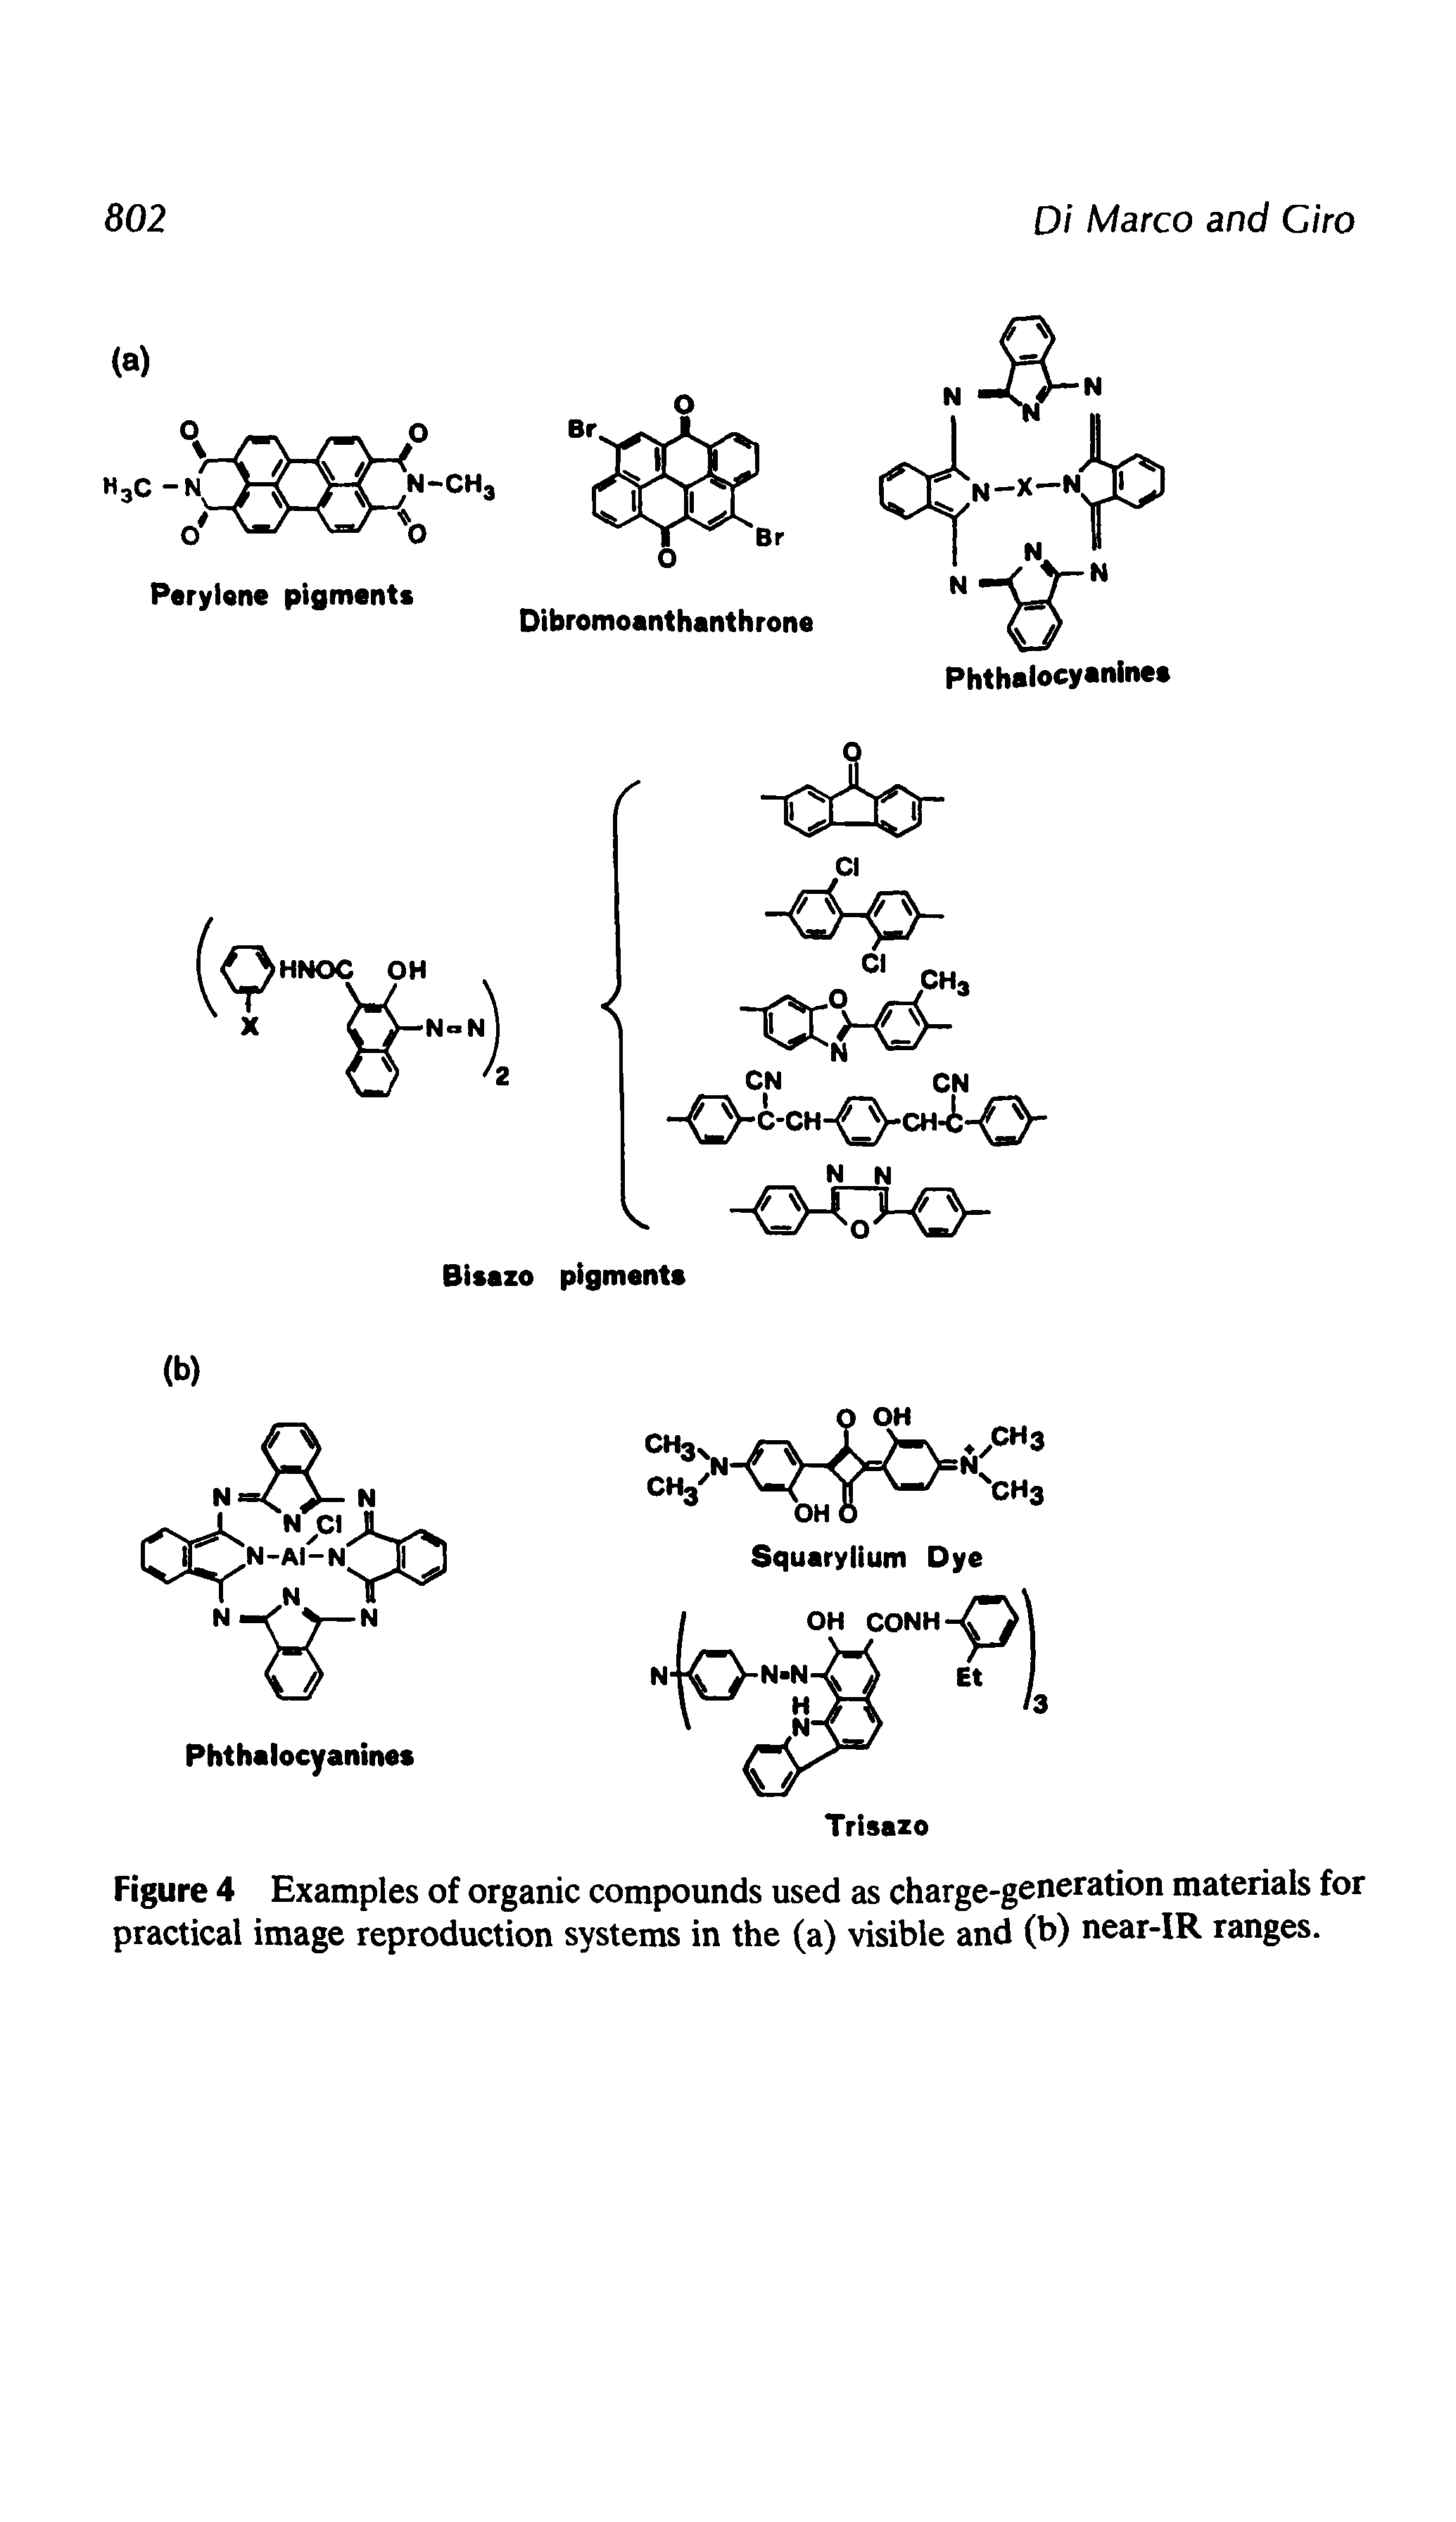 Figure 4 Examples of organic compounds used as charge-generation materials for practical image reproduction systems in the (a) visible and (b) near-IR ranges.